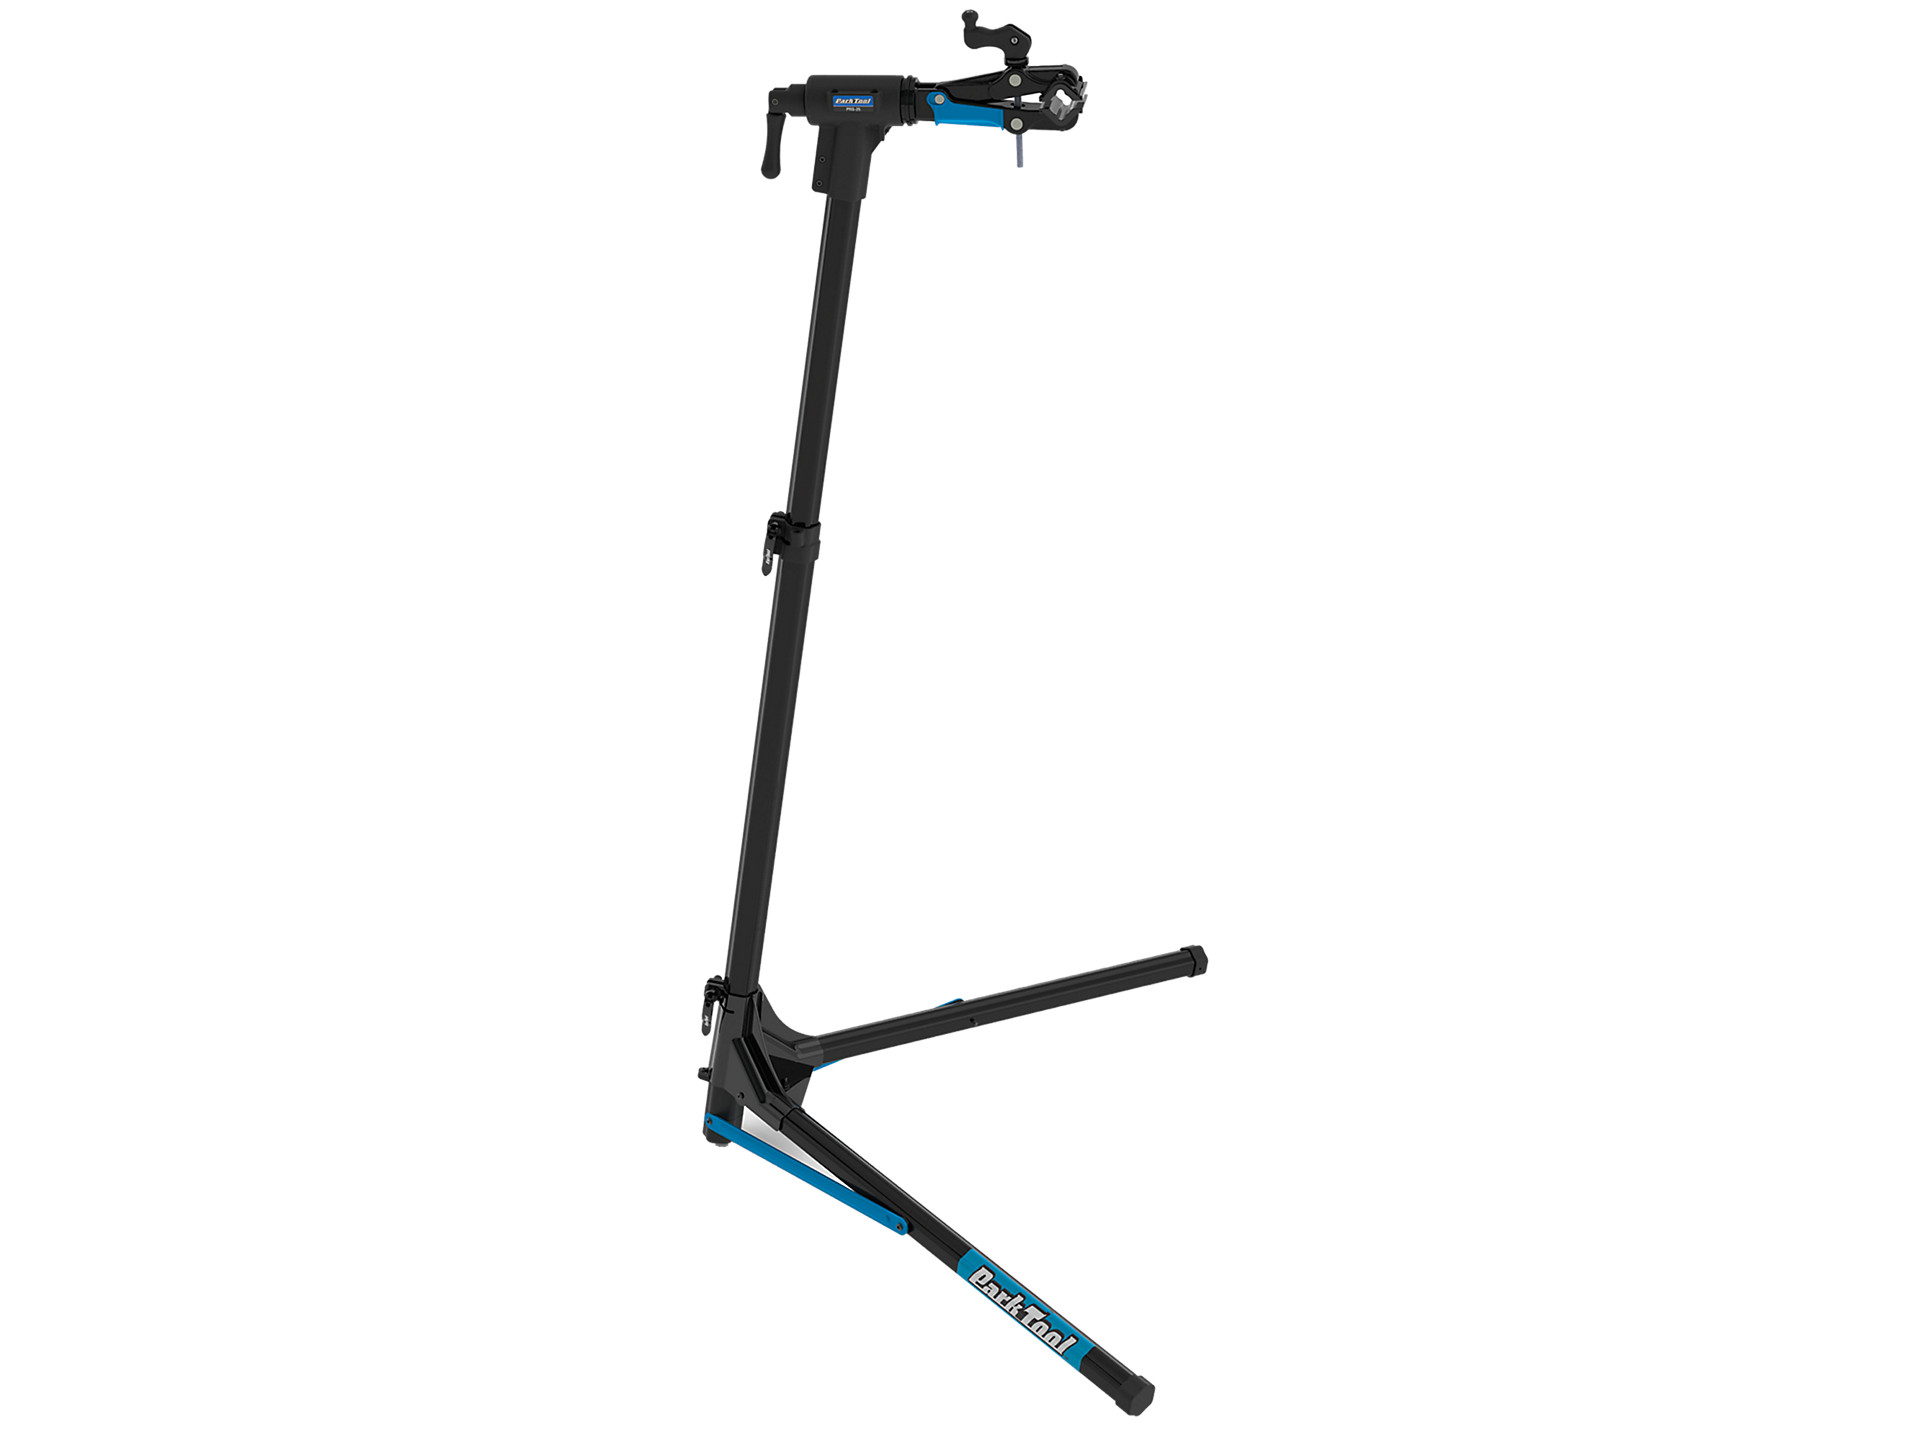 Park Tool PCS-10.2 Deluxe Home Mechanic Repair Stand for sale online 